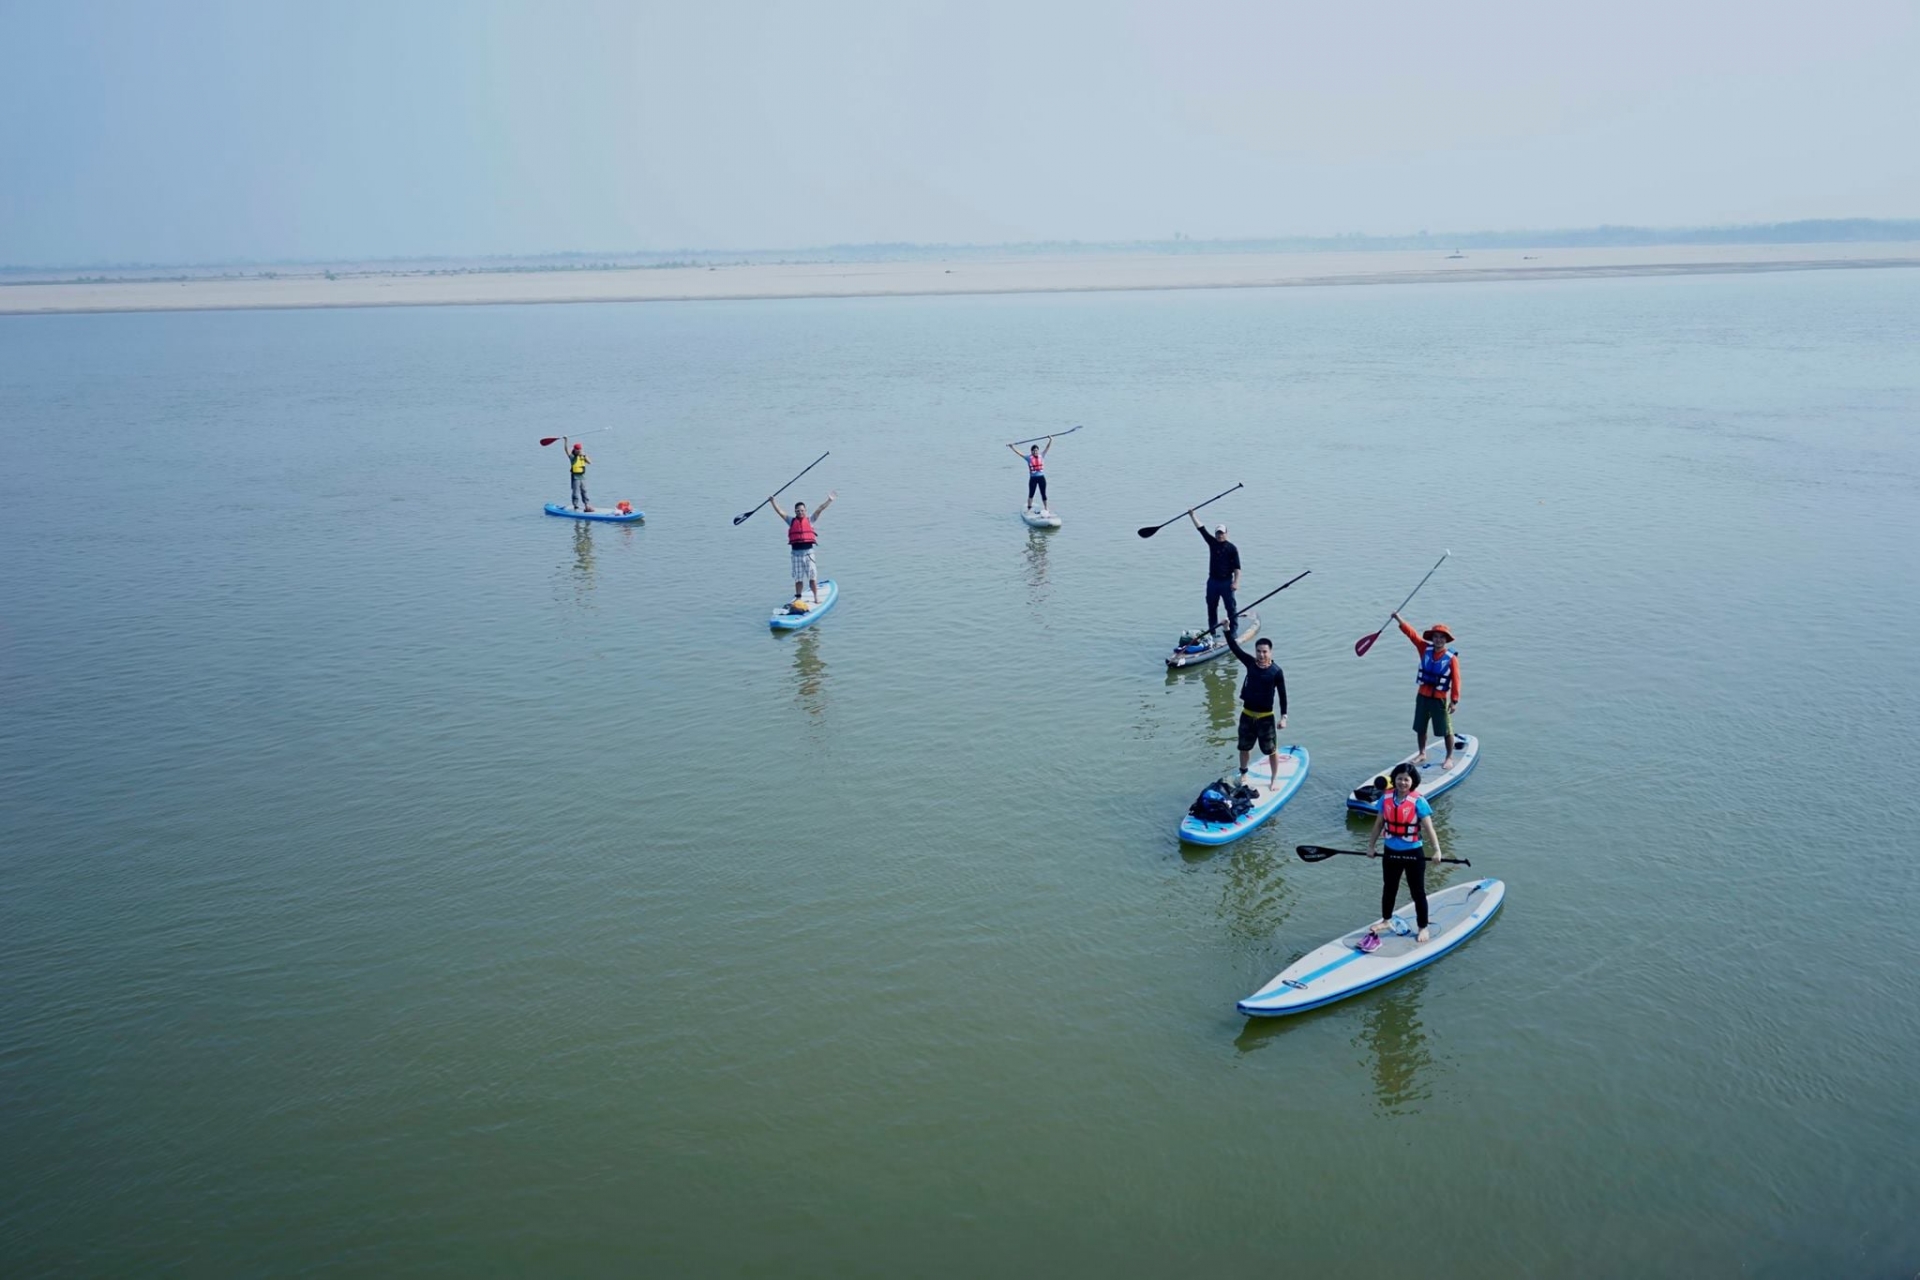 Young people in Hanoi try paddle boarding on Red river